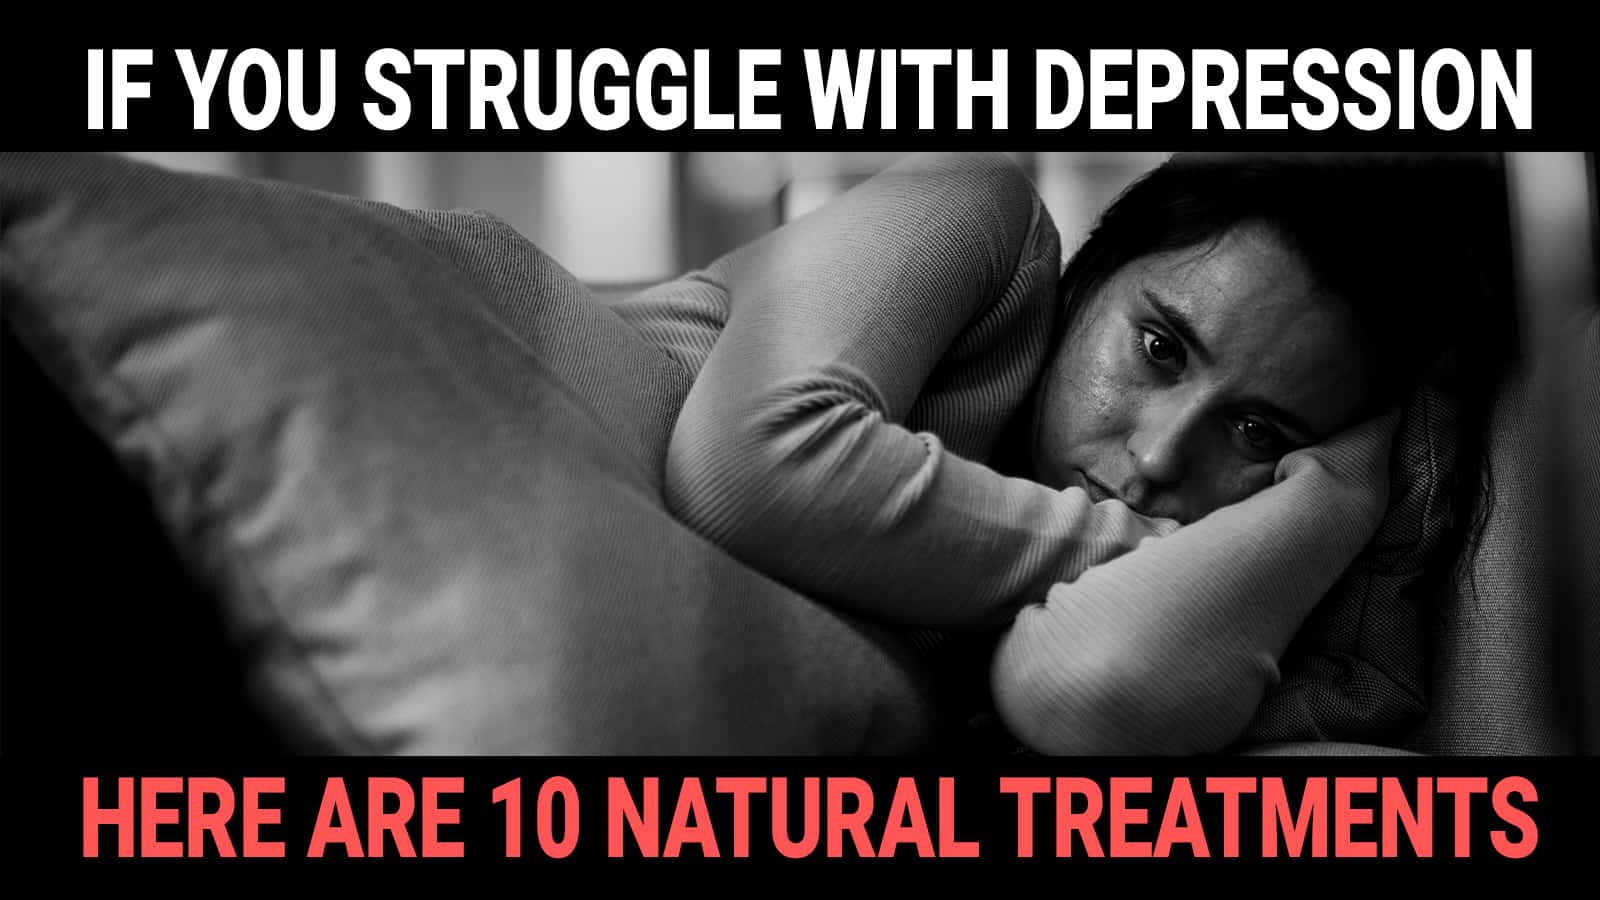 If You Struggle With Depression, Here Are 10 Natural Treatments